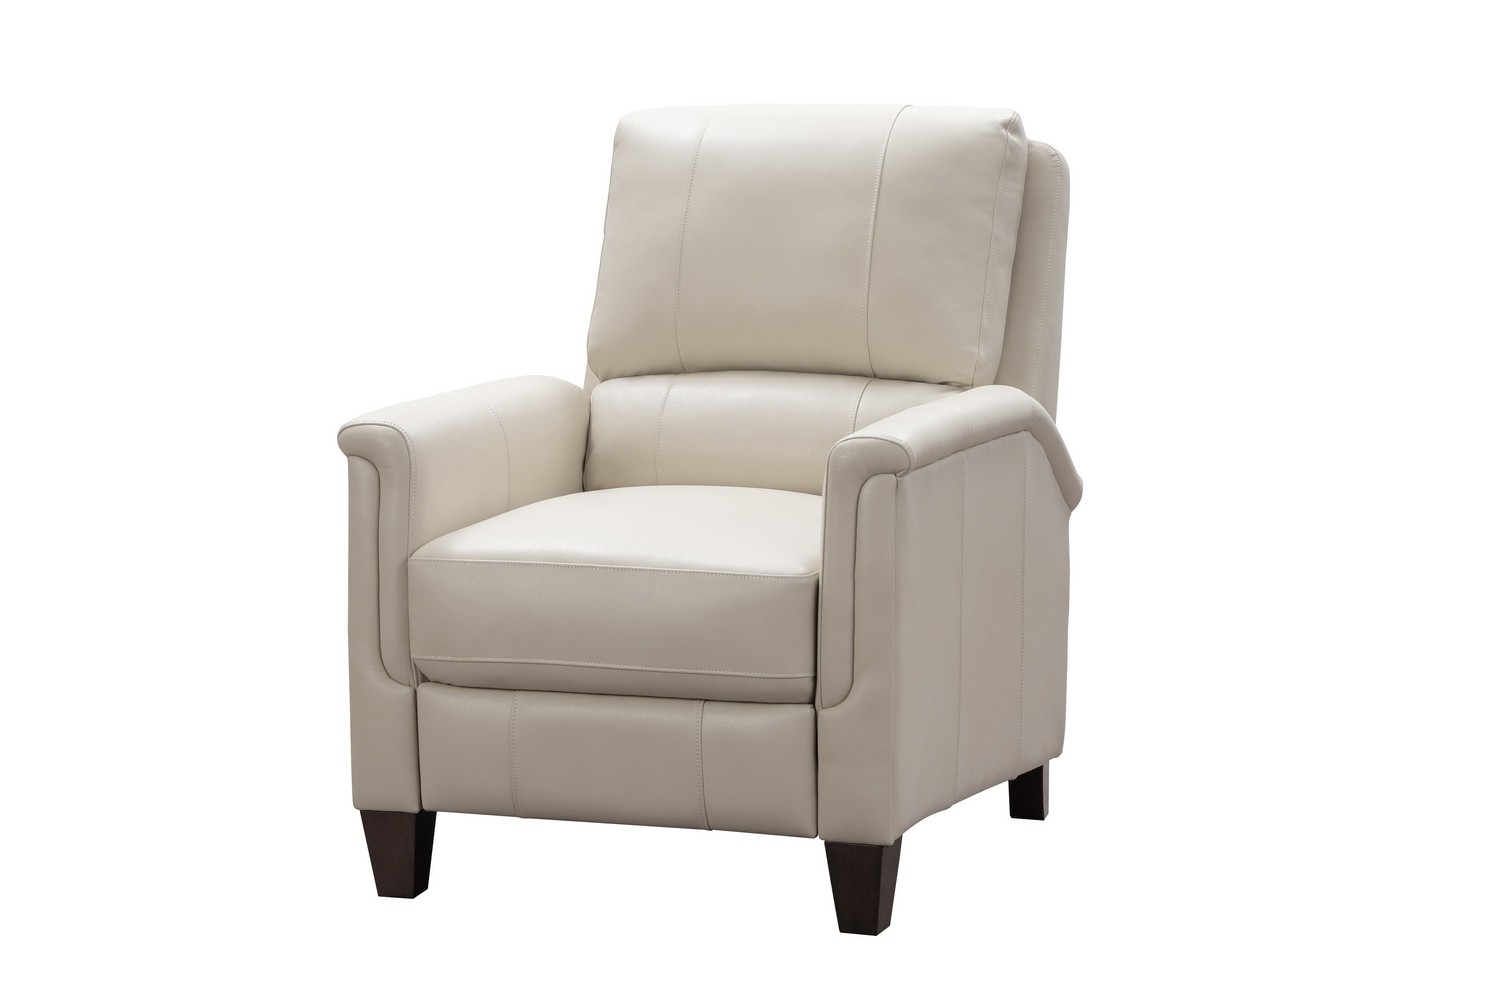 Barcalounger Quinn Power Recliner Chair - Barone Parchment/All Leather